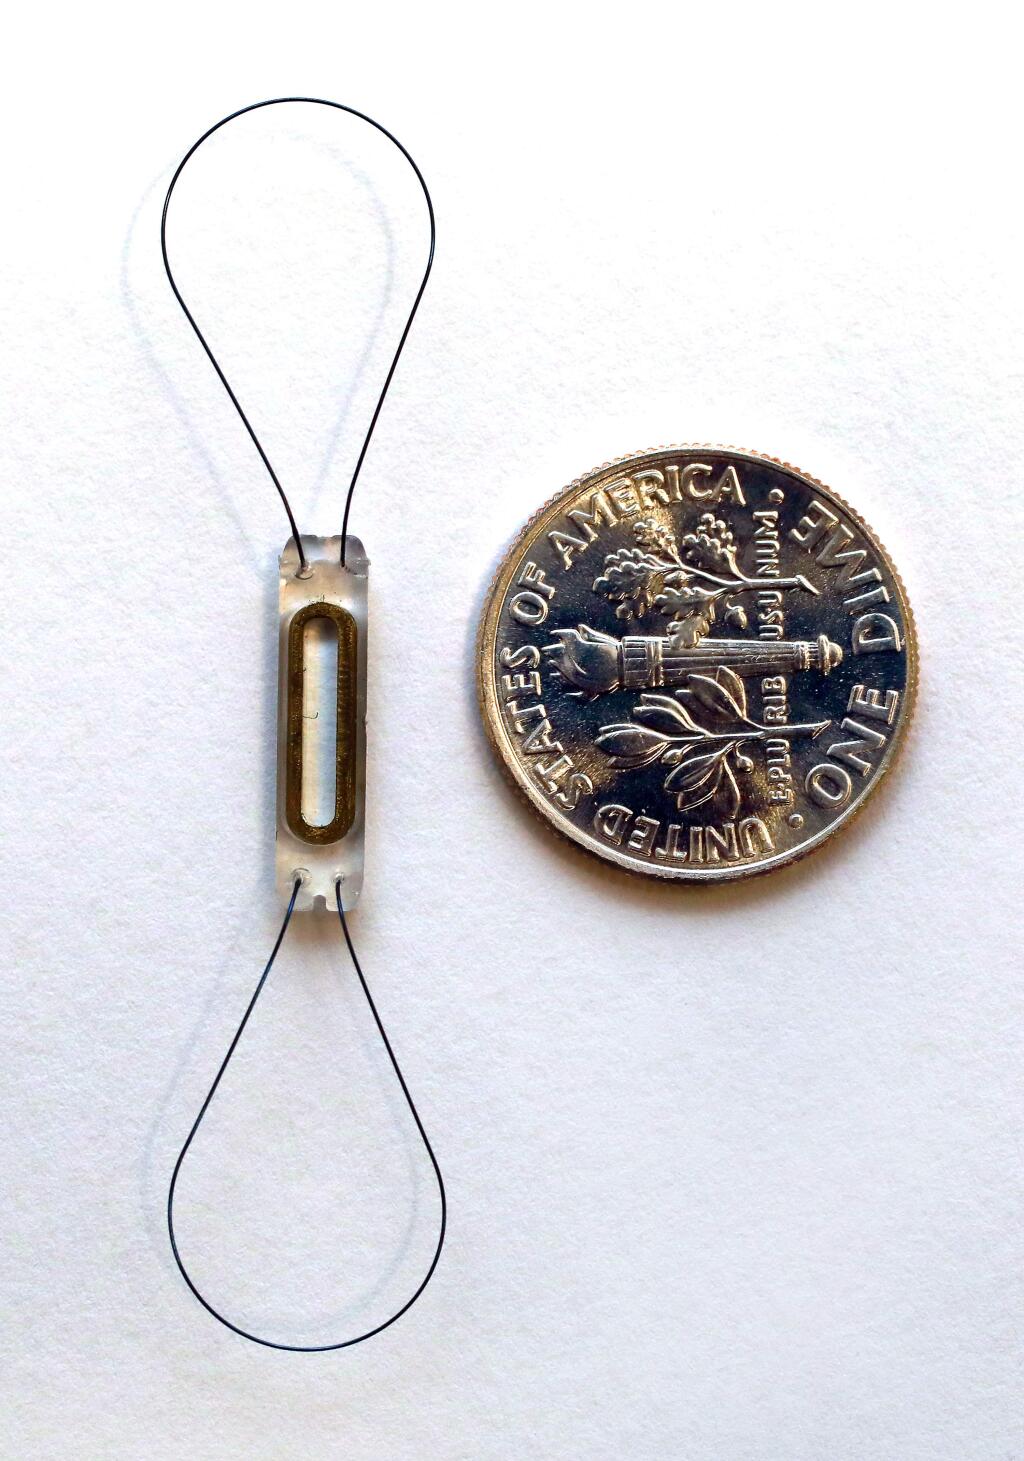 The CardioMems Heart Failure system, left, is implanted in an artery in the heart to measure changes in blood pressures as an early warning system for detecting heart failure. (John Burgess/The Press Democrat)